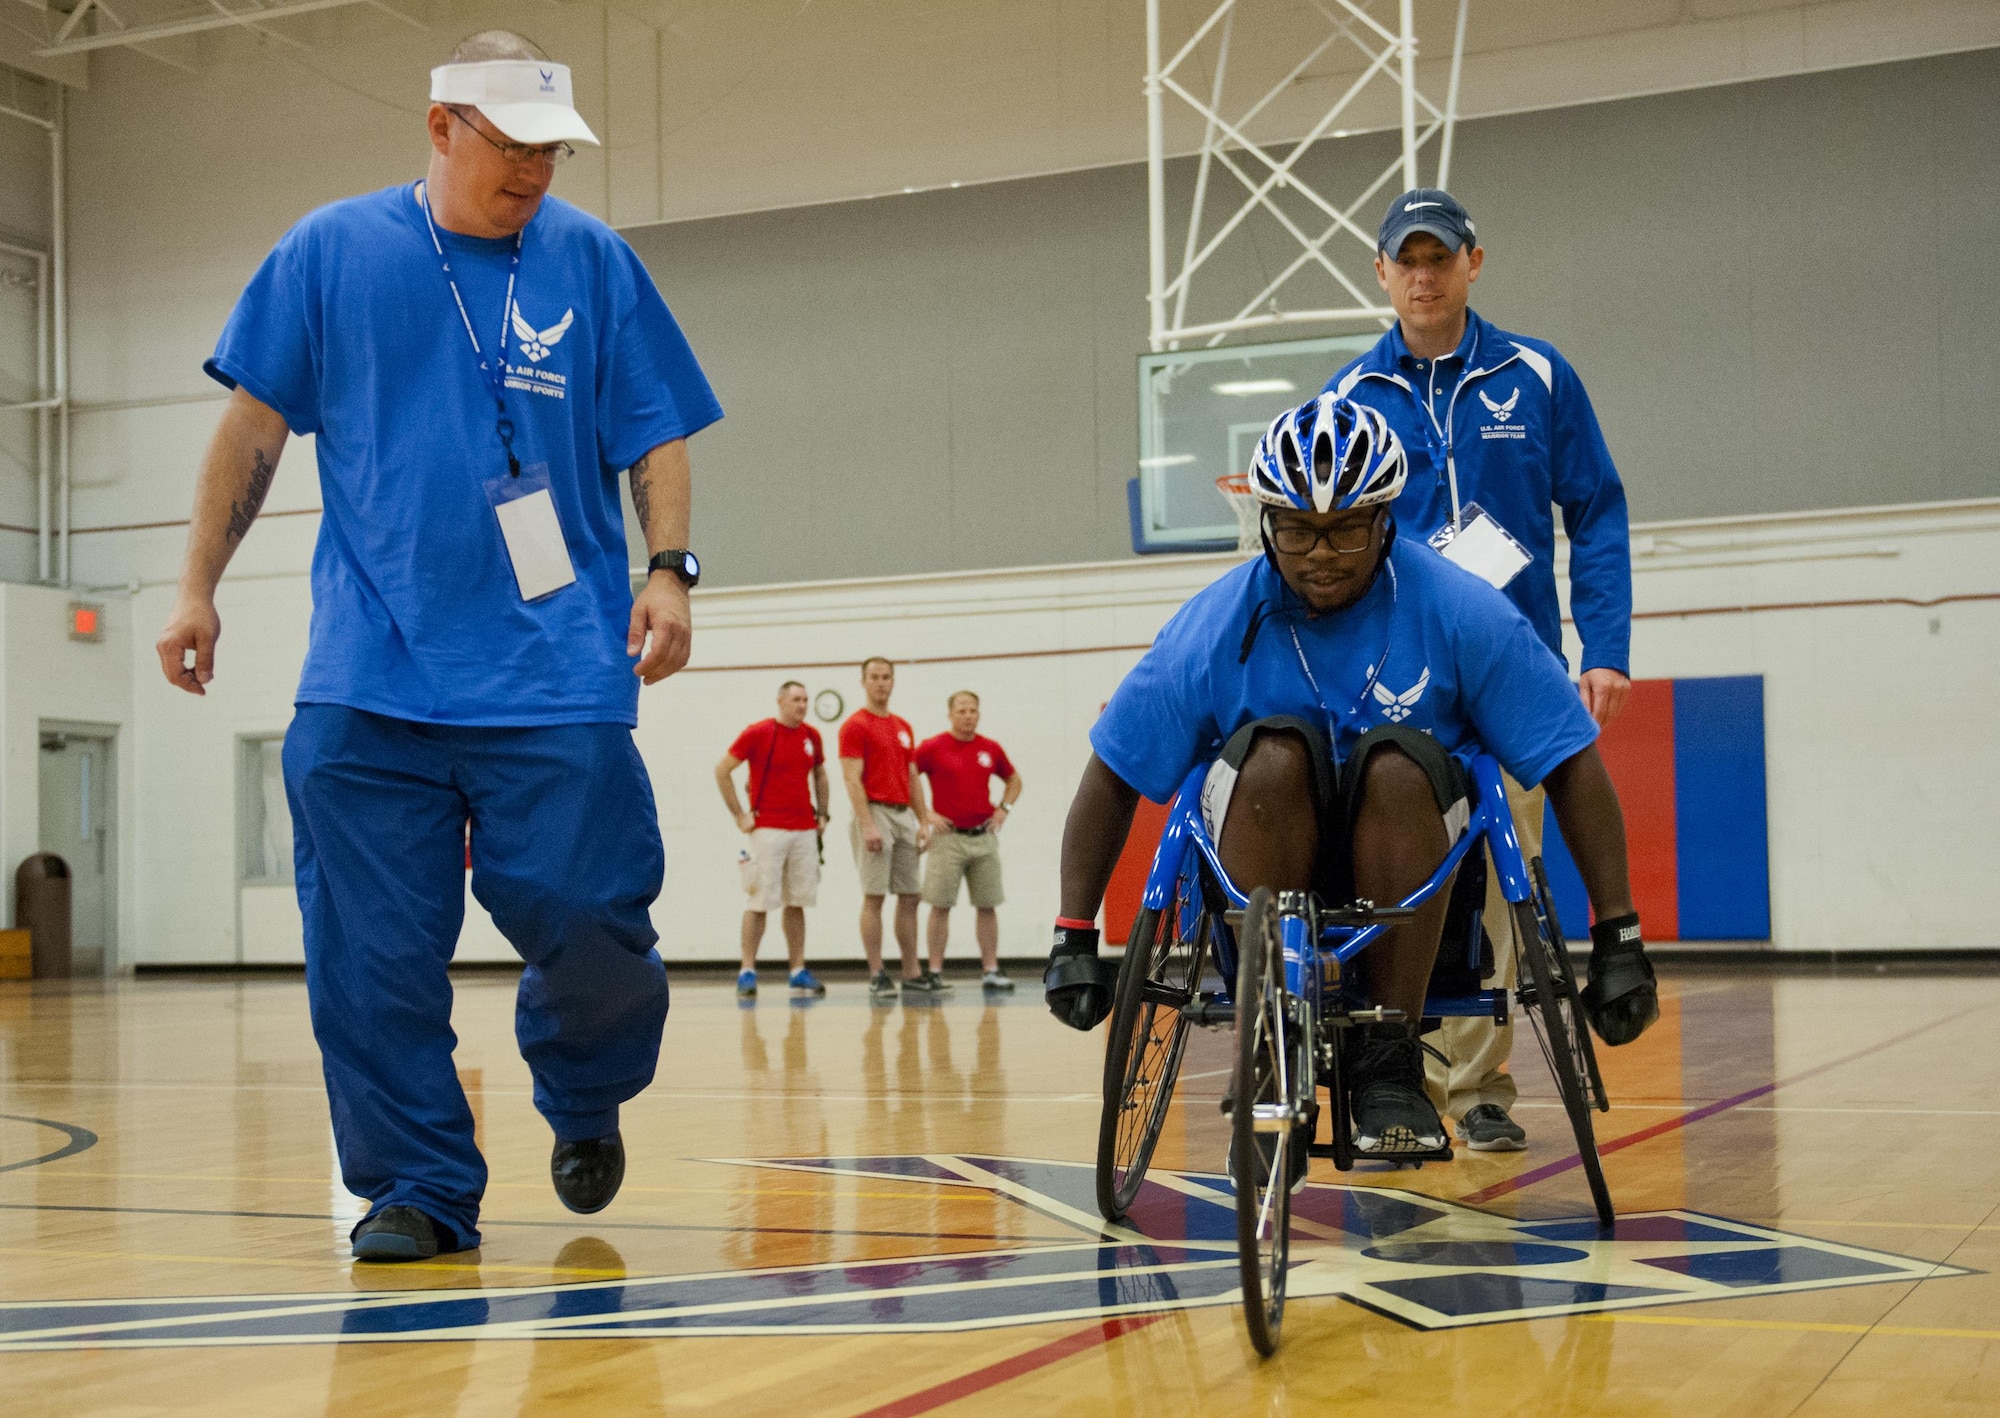 Tech. Sgt. Ryan Delaney, an Air Force wounded warrior mentor, watches Tremayne Maxwell, an Air Force wounded warrior athlete, perfect his wheelchair basketball rolling skills during the first day of an introductory adaptive sports and rehabilitation camp at Eglin Air Force Base, Fla., April 13, 2015. Delaney, a flight chief with the 412th Security Forces Squadron at Edwards AFB, Calif., helped prepare approximately 45 participants in the week-long camp and training events. (U.S. Air Force photo/Samuel King Jr.)